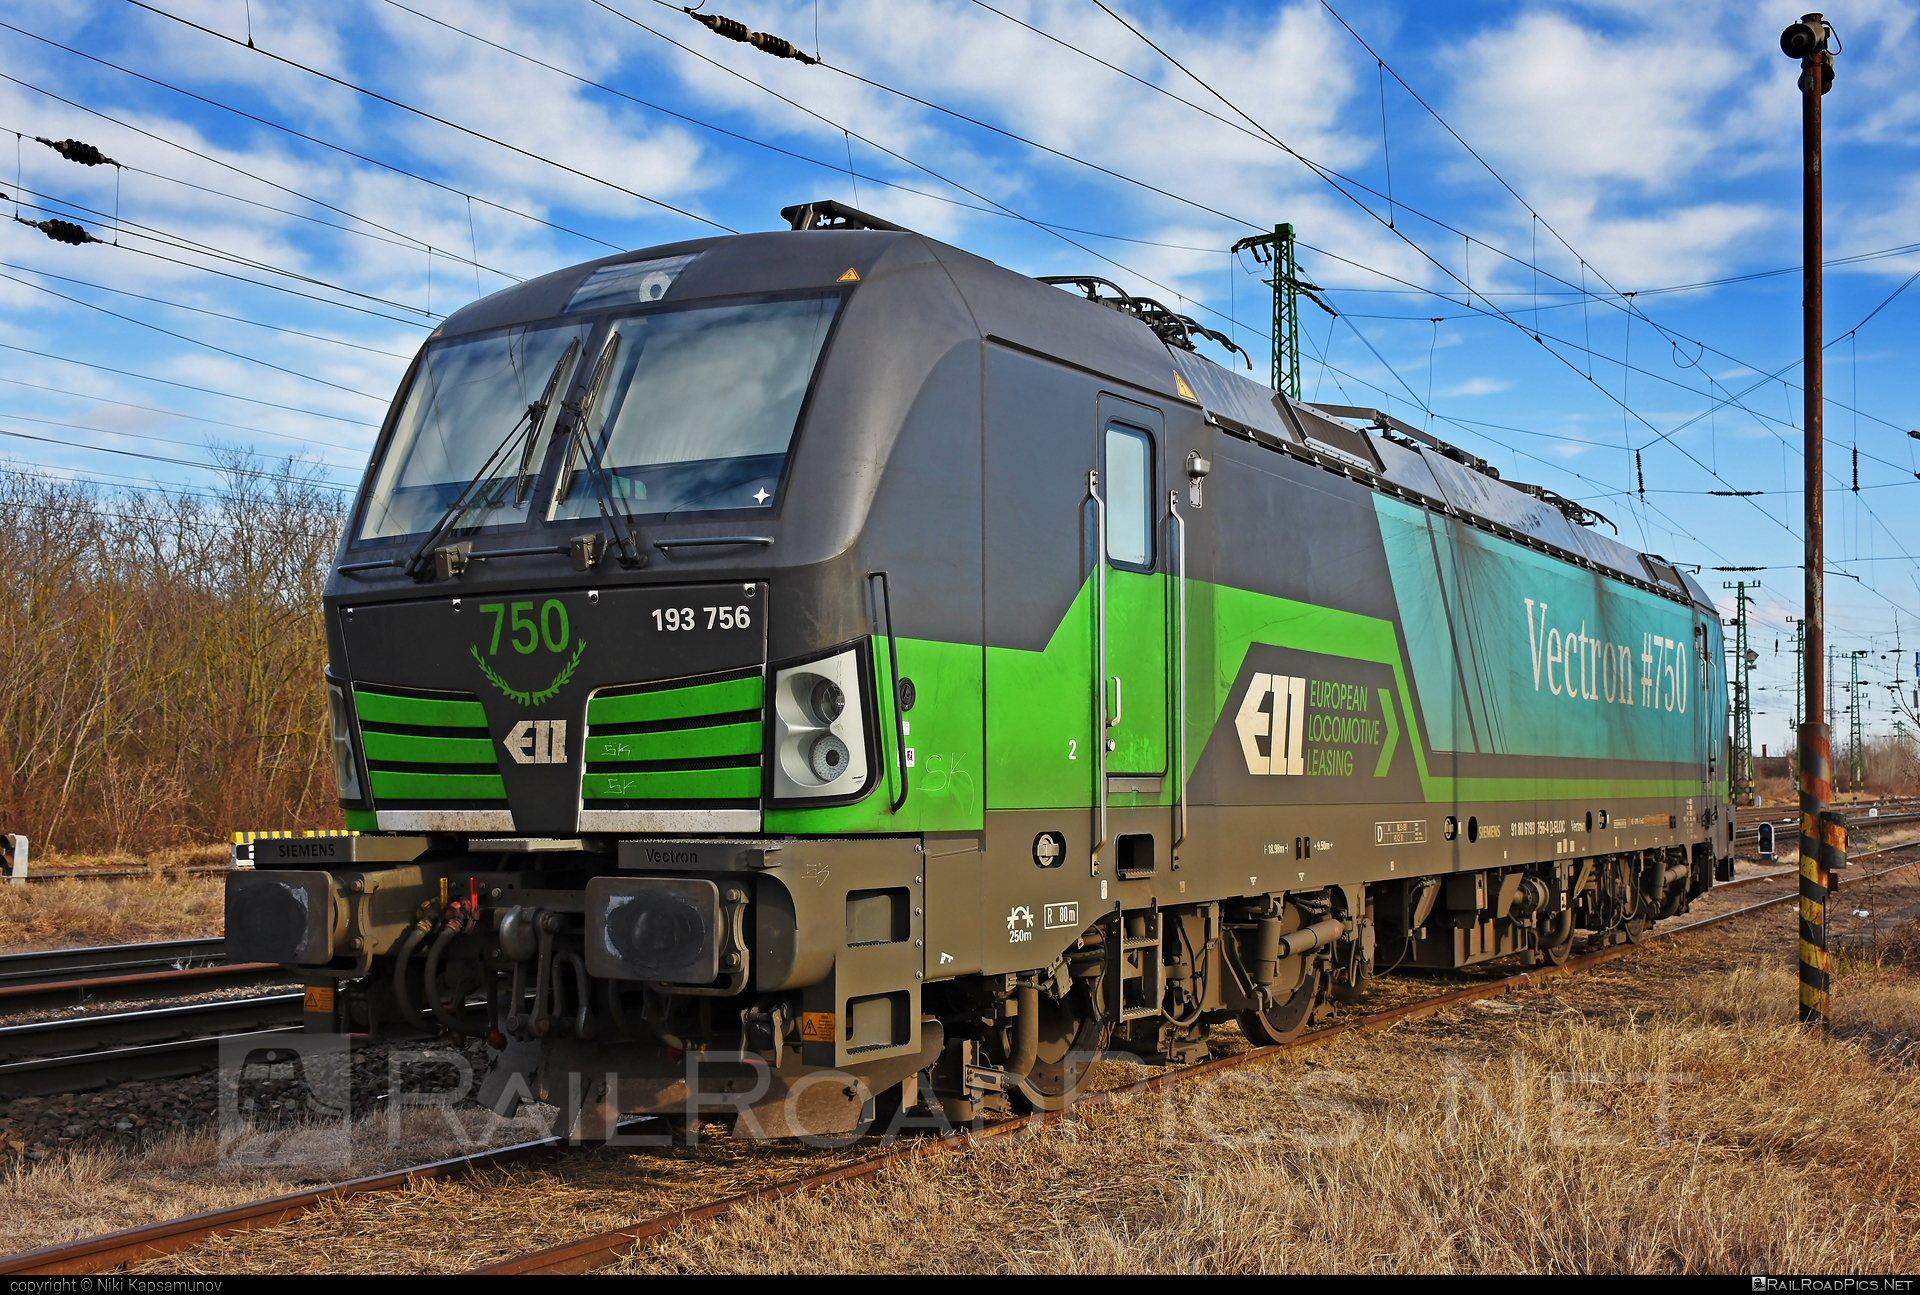 Siemens Vectron MS - 193 756 operated by RTB Cargo GmbH #ell #ellgermany #eloc #europeanlocomotiveleasing #rtb #rtbcargo #siemens #siemensVectron #siemensVectronMS #vectron #vectronMS